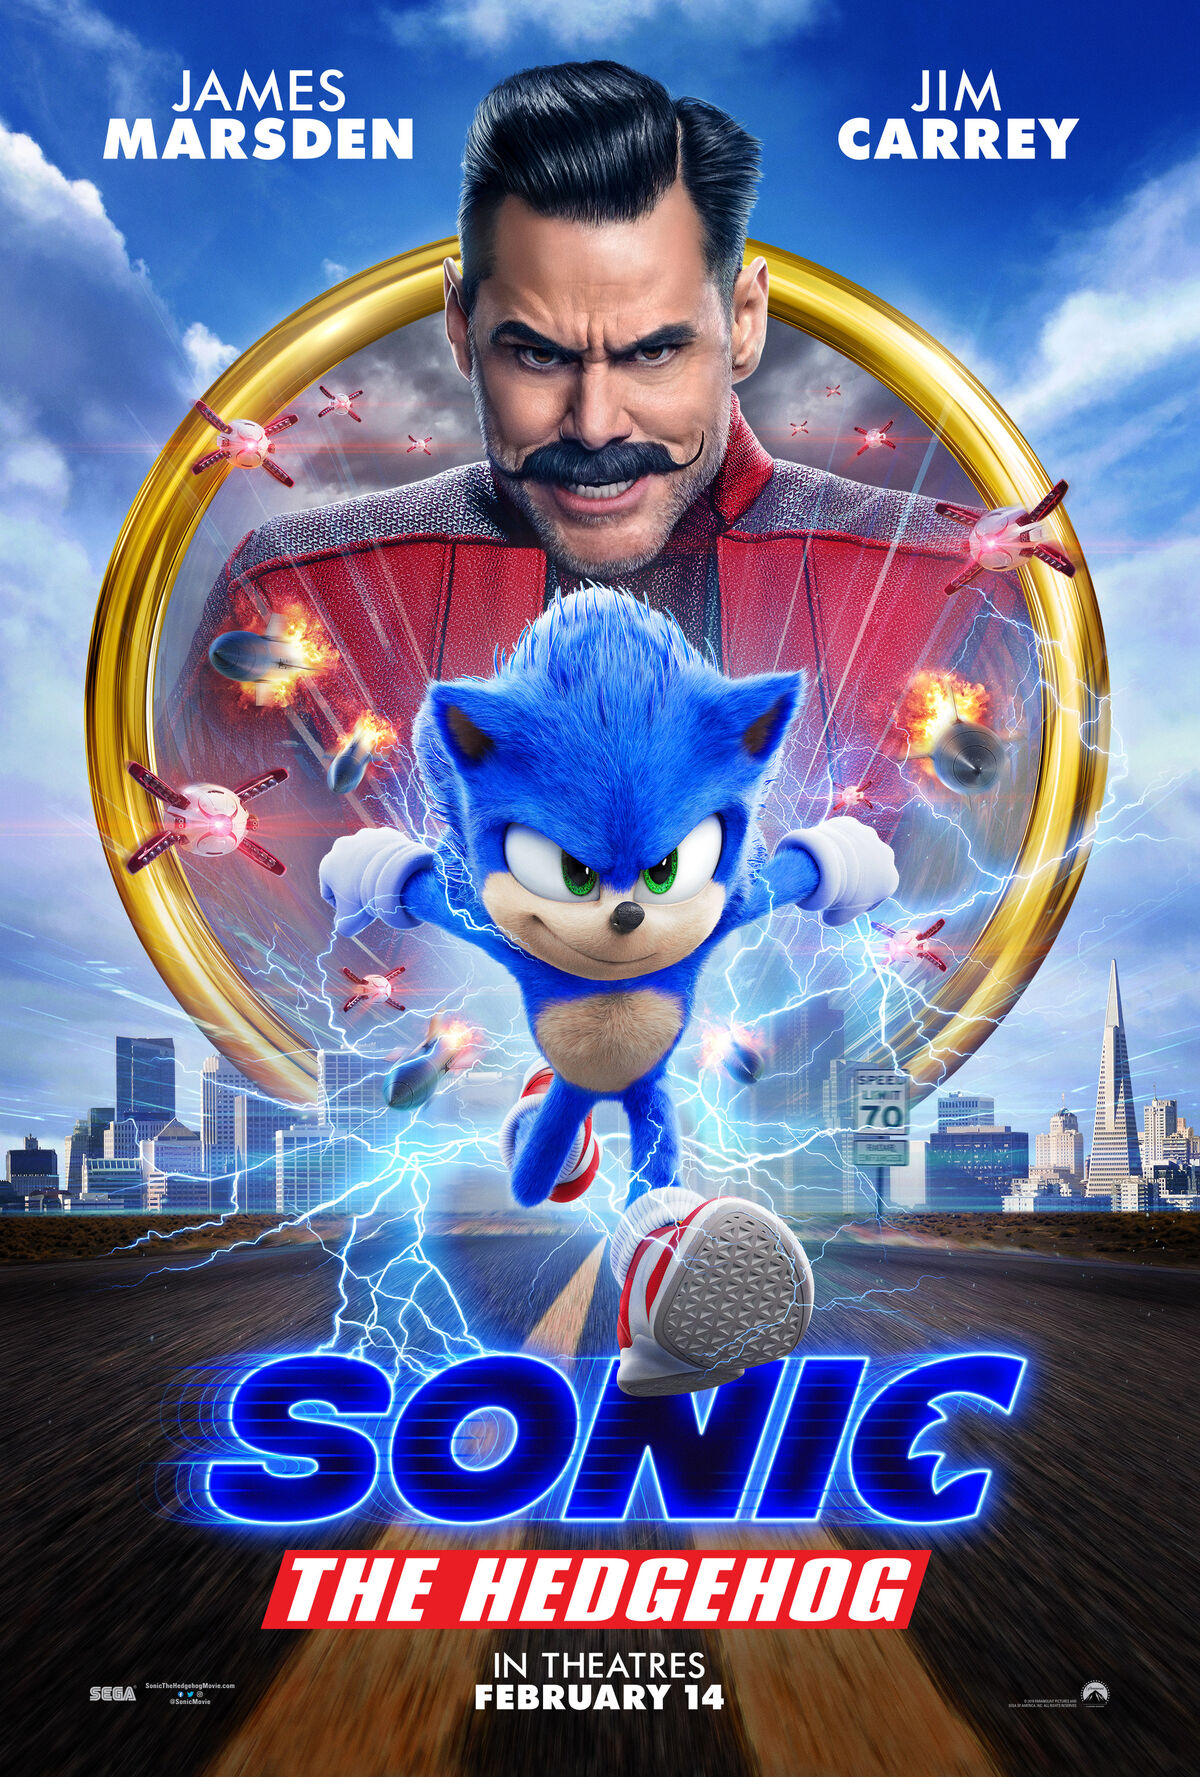 Sonic the Hedgehog 2 (film), JH Movie Collection Wiki